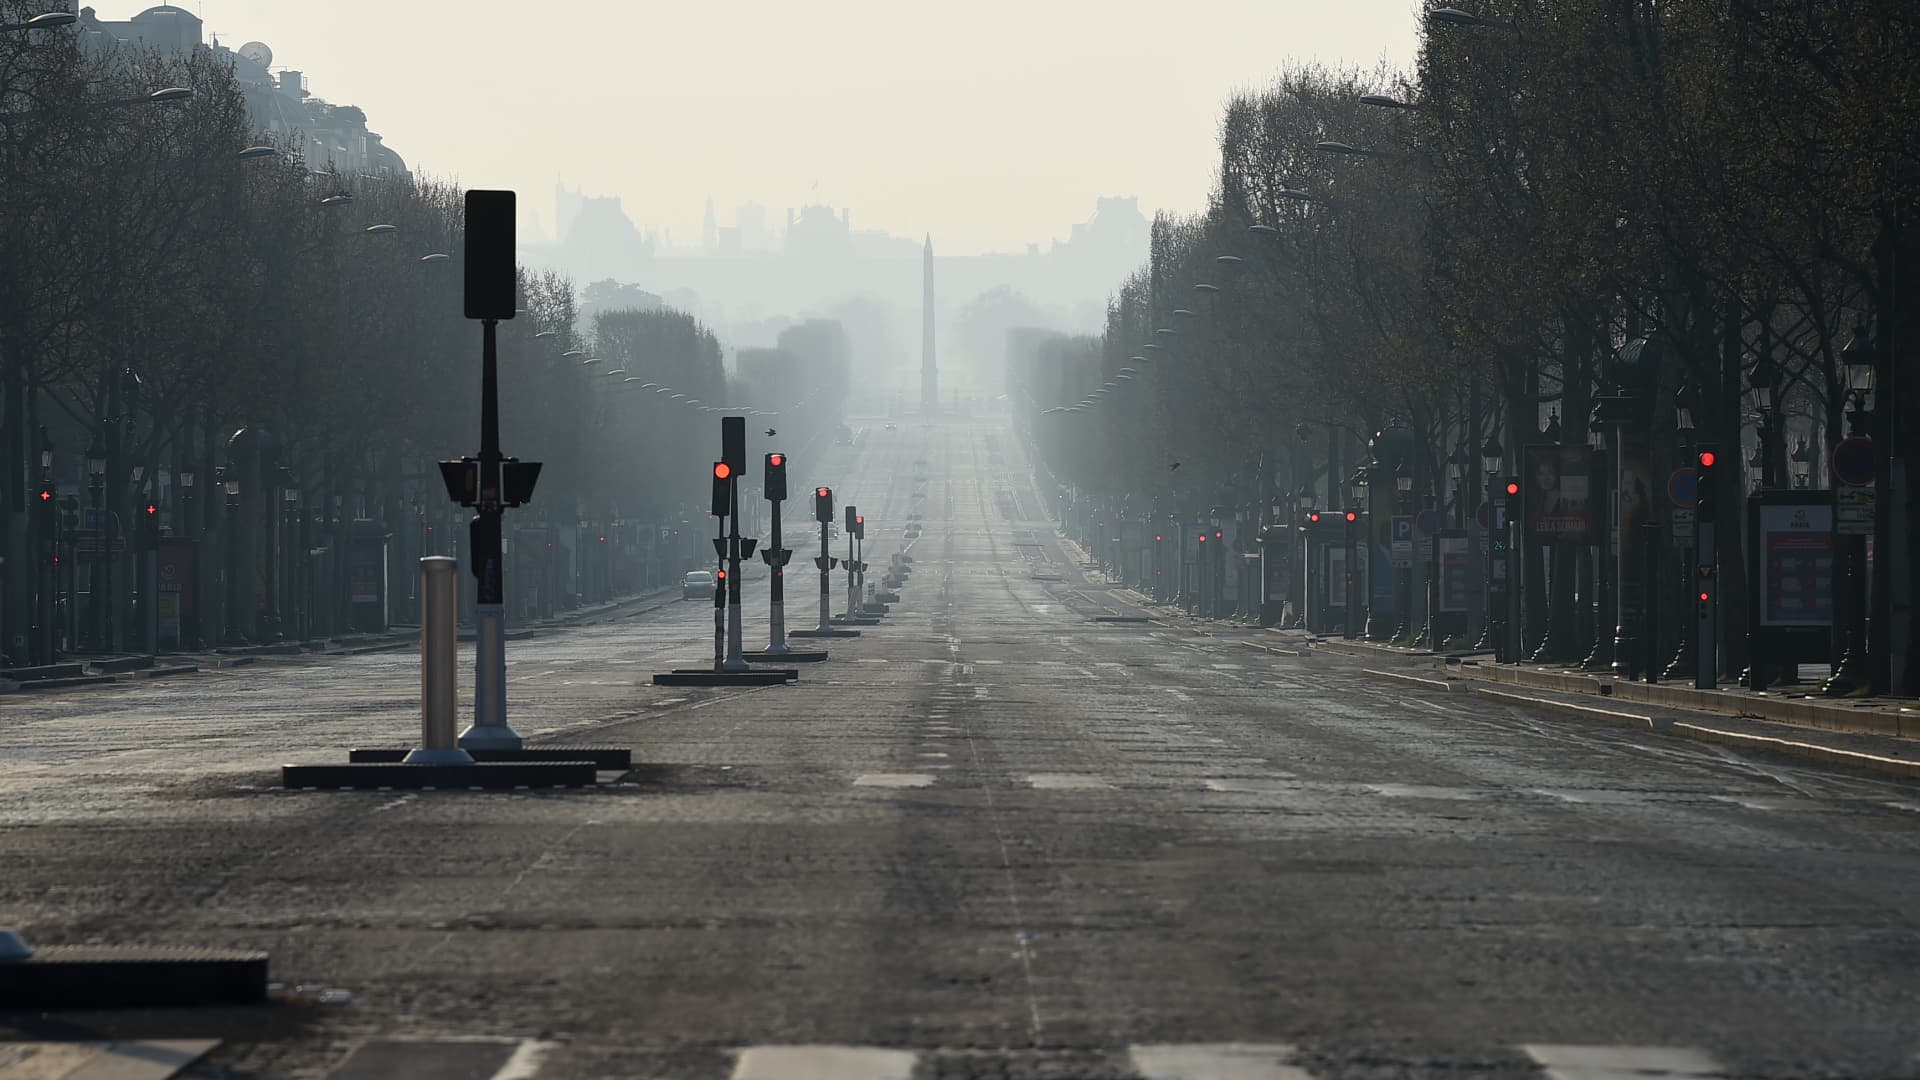 Empty Champs Elysees avenue is pictured on March 28, 2020 in Paris, France. The country has introduced fines for people caught violating its nationwide lockdown measures intended to stop the spread of COVID-19.